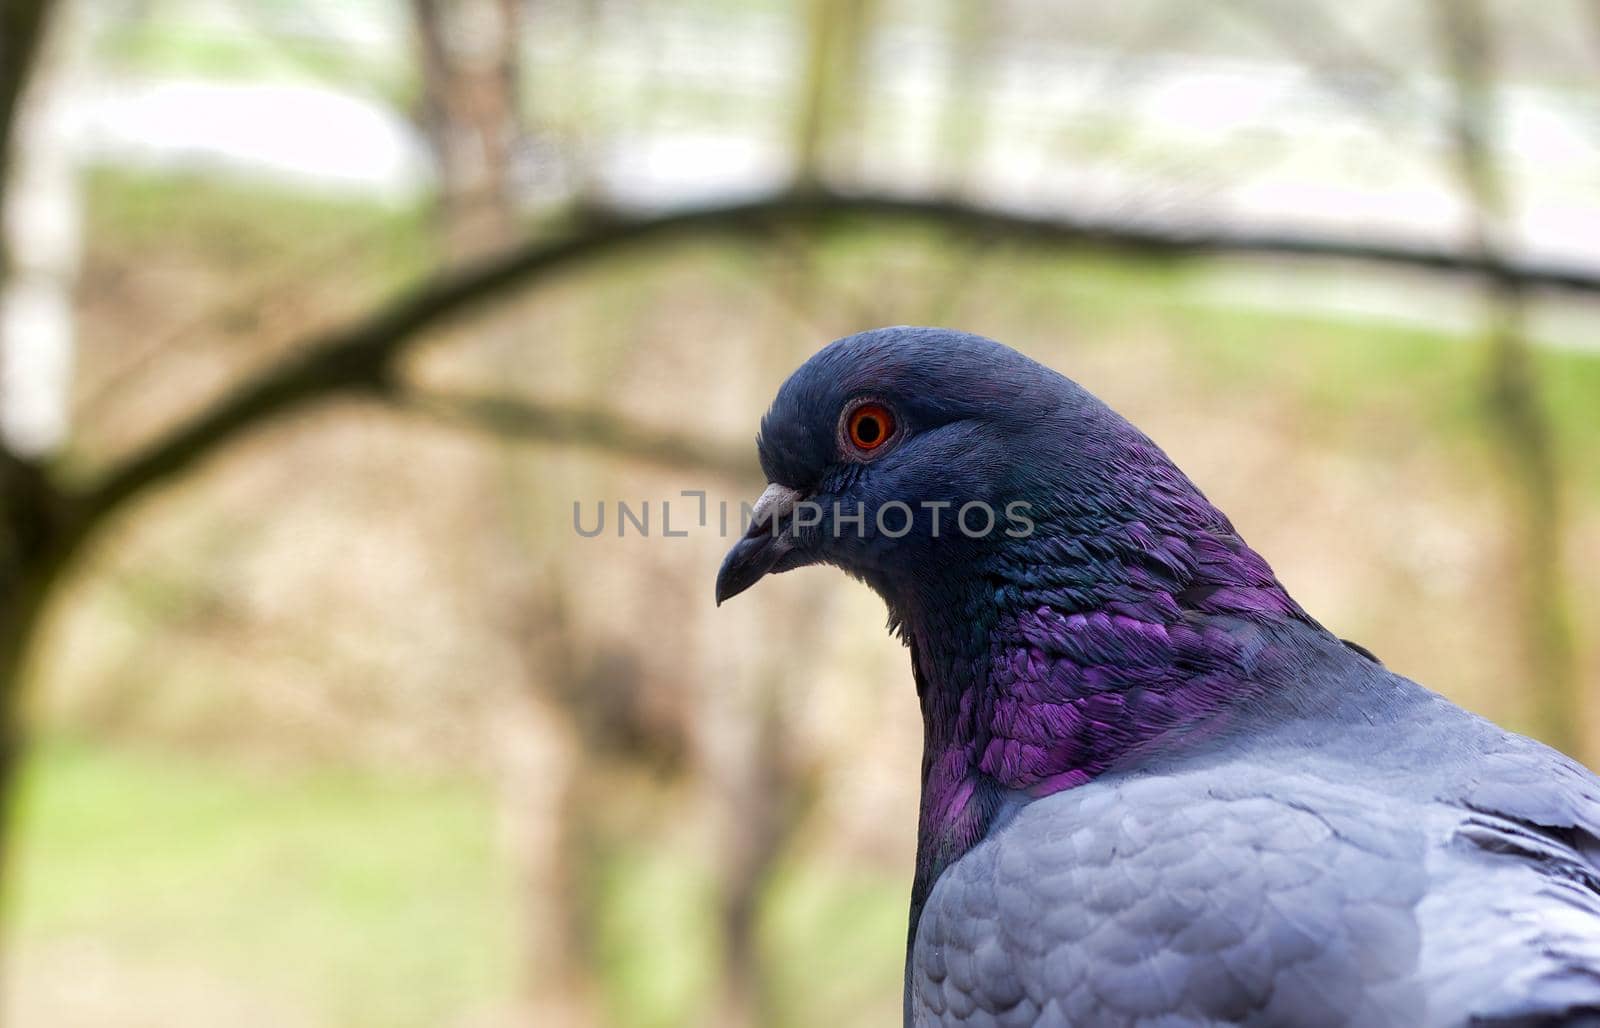 Serious rock Pigeon close-up portrait side profile against blurry background. Shallow depth of field of bird head with shiny neck by arpanbhatia